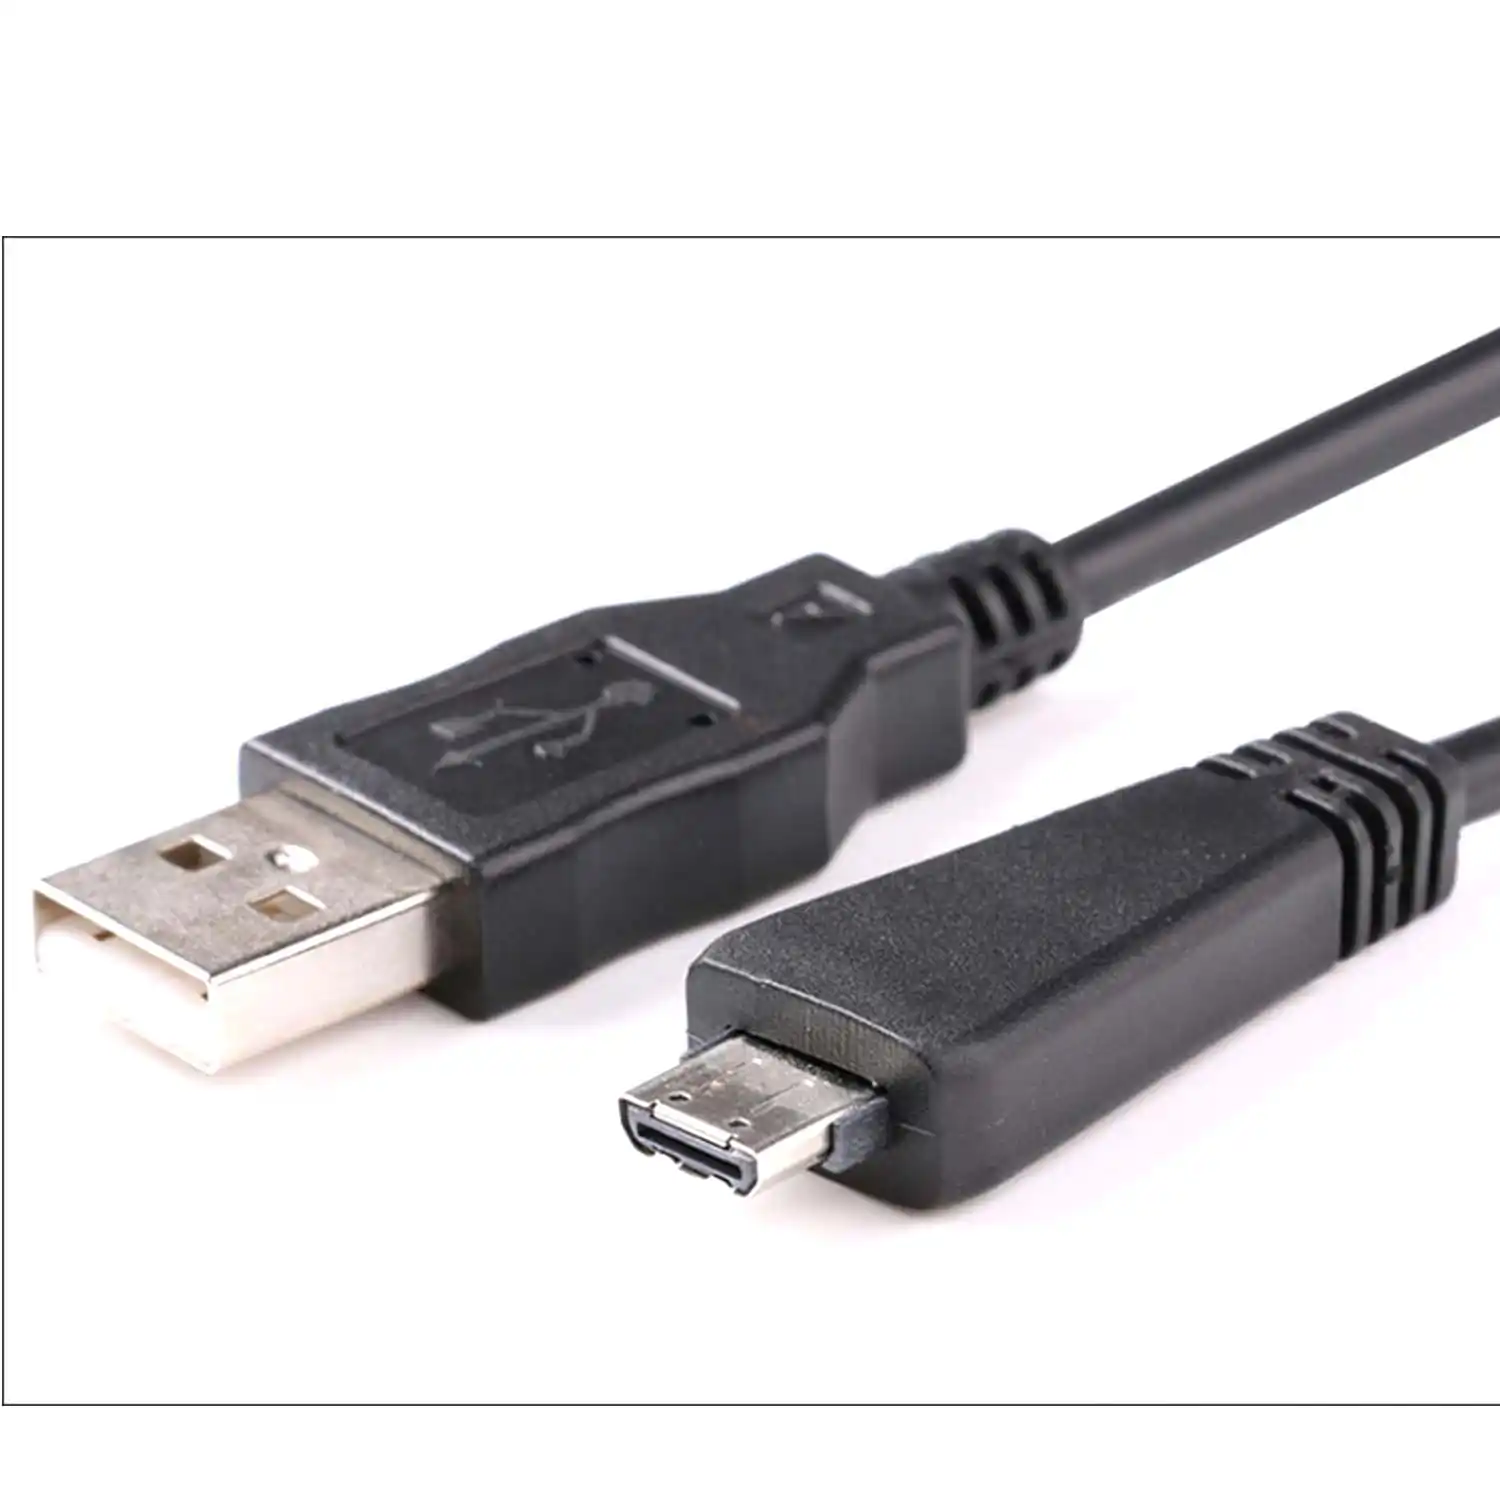 Black Micro-USB to USB 2.0 Right Angle Adapter for High Speed Data-Transfer Cable for connecting any compatible USB Accessory//Device//Drive//Flash//and truly On-The-Go! Micromax X253 OTG